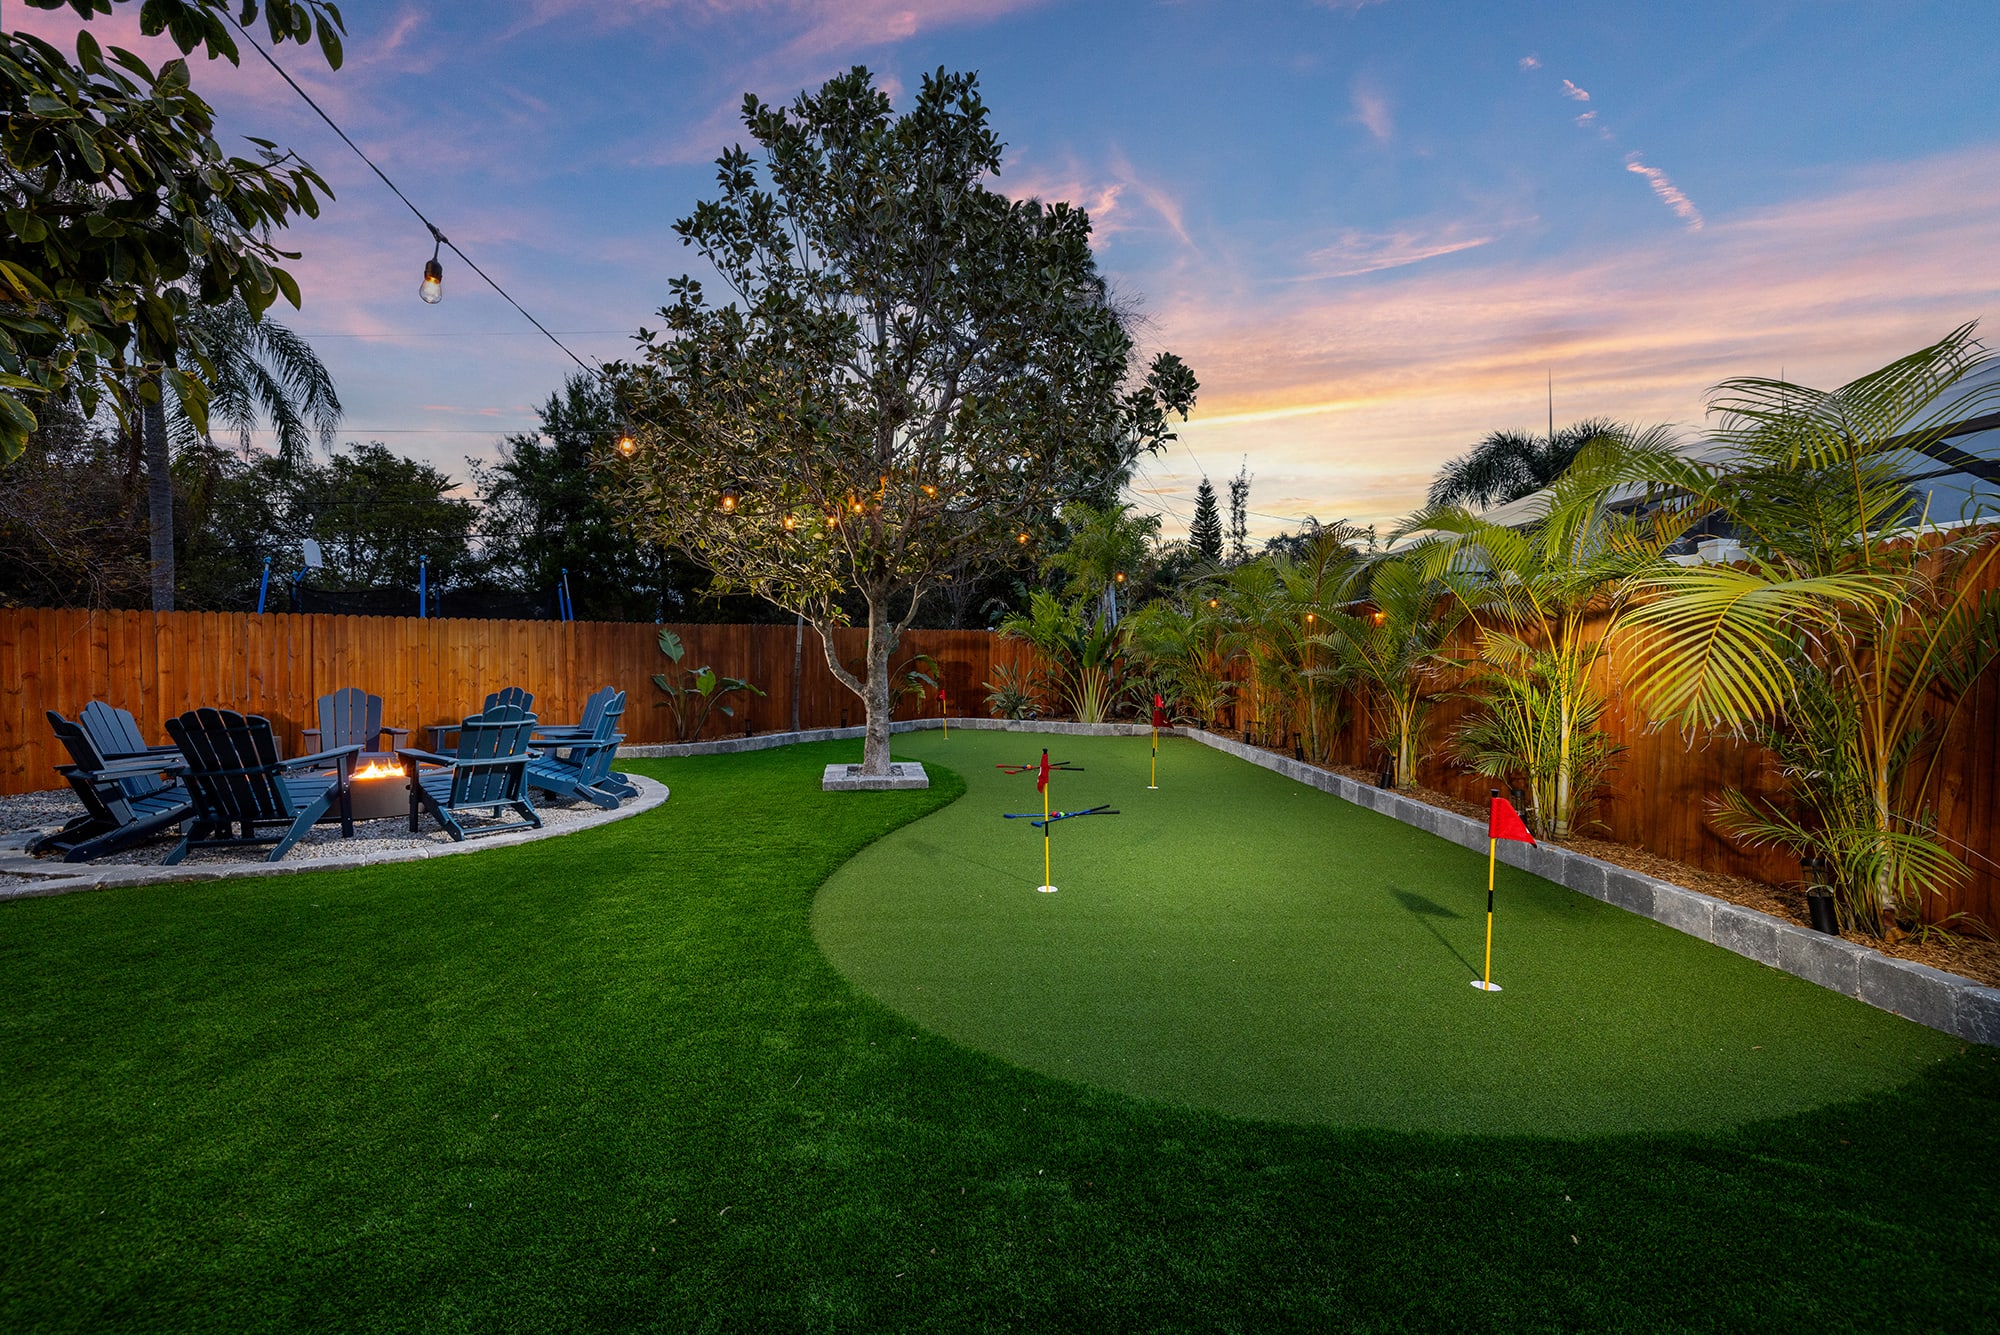 Sit by the firepit or play a game of putt putt!